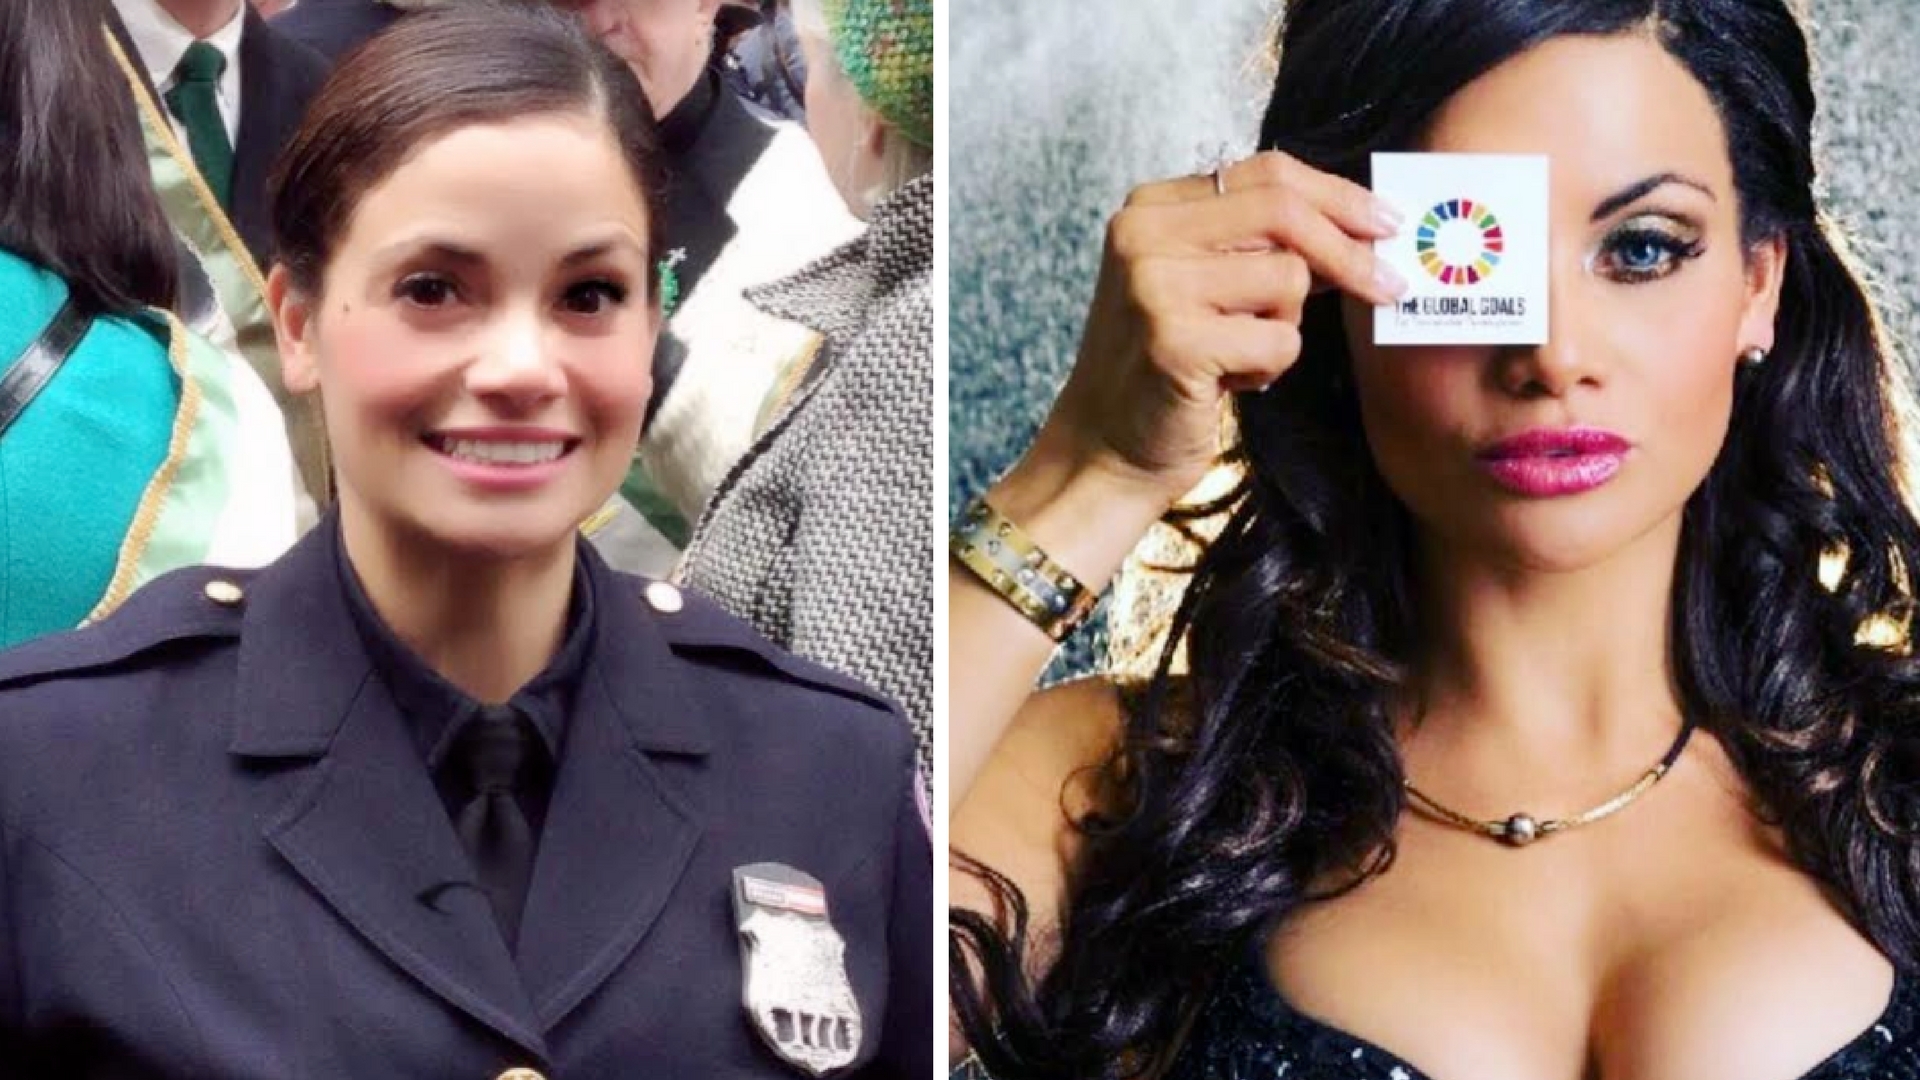 New York officer fights crime by day, models lingerie by night